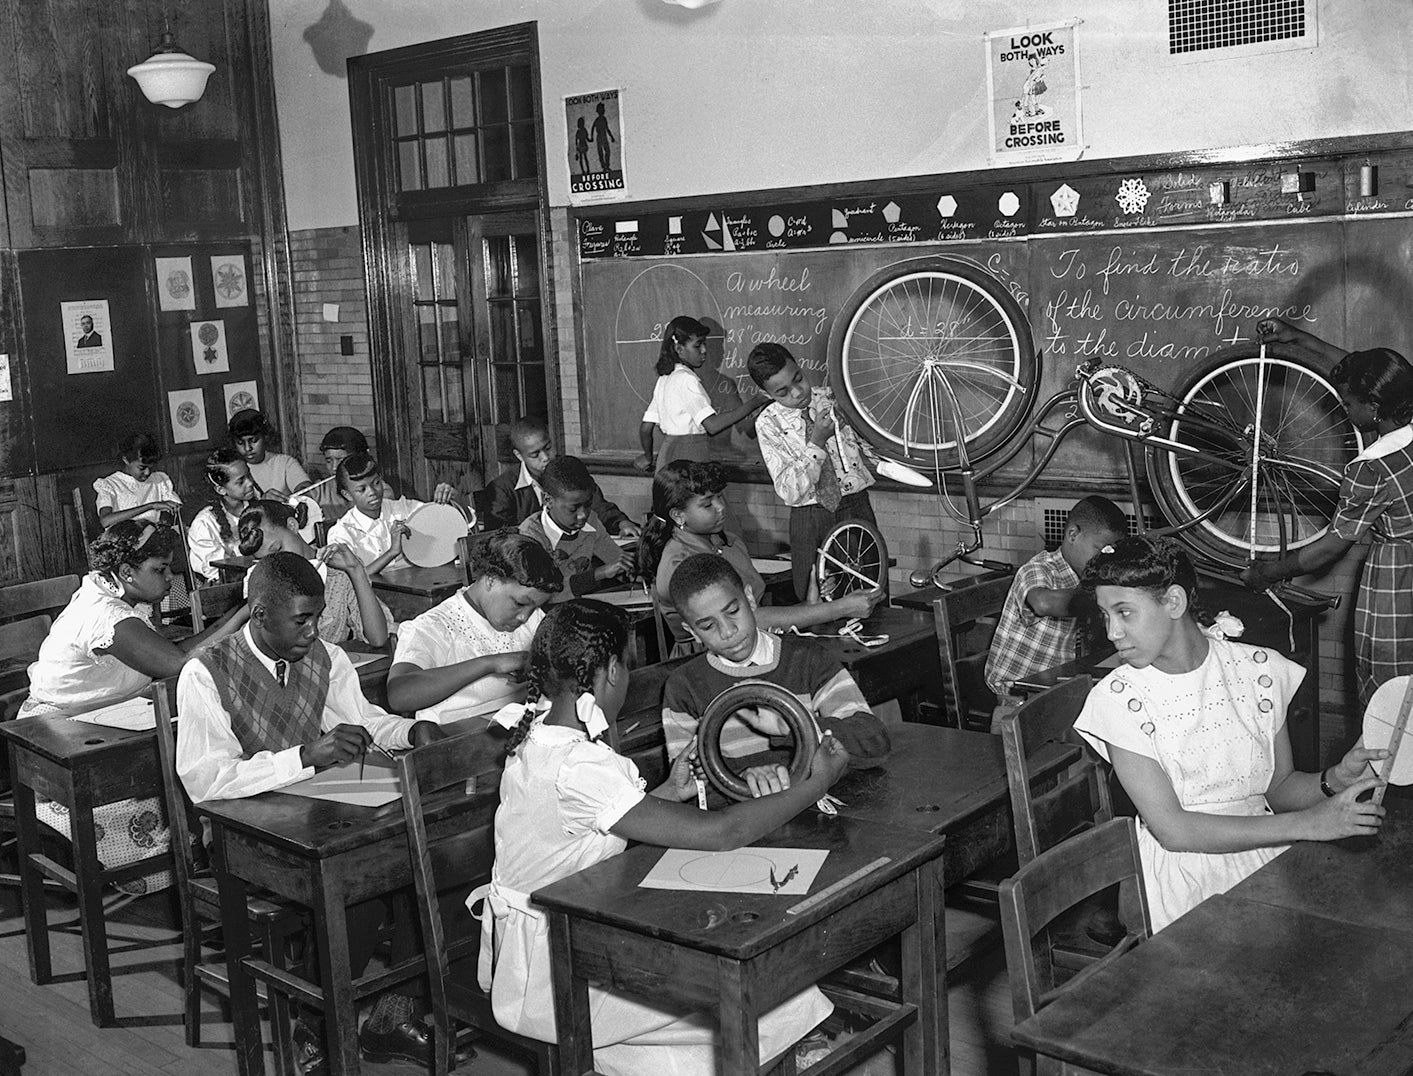 Students in a class measure wheels to determine diameter and circumference  c. 1950